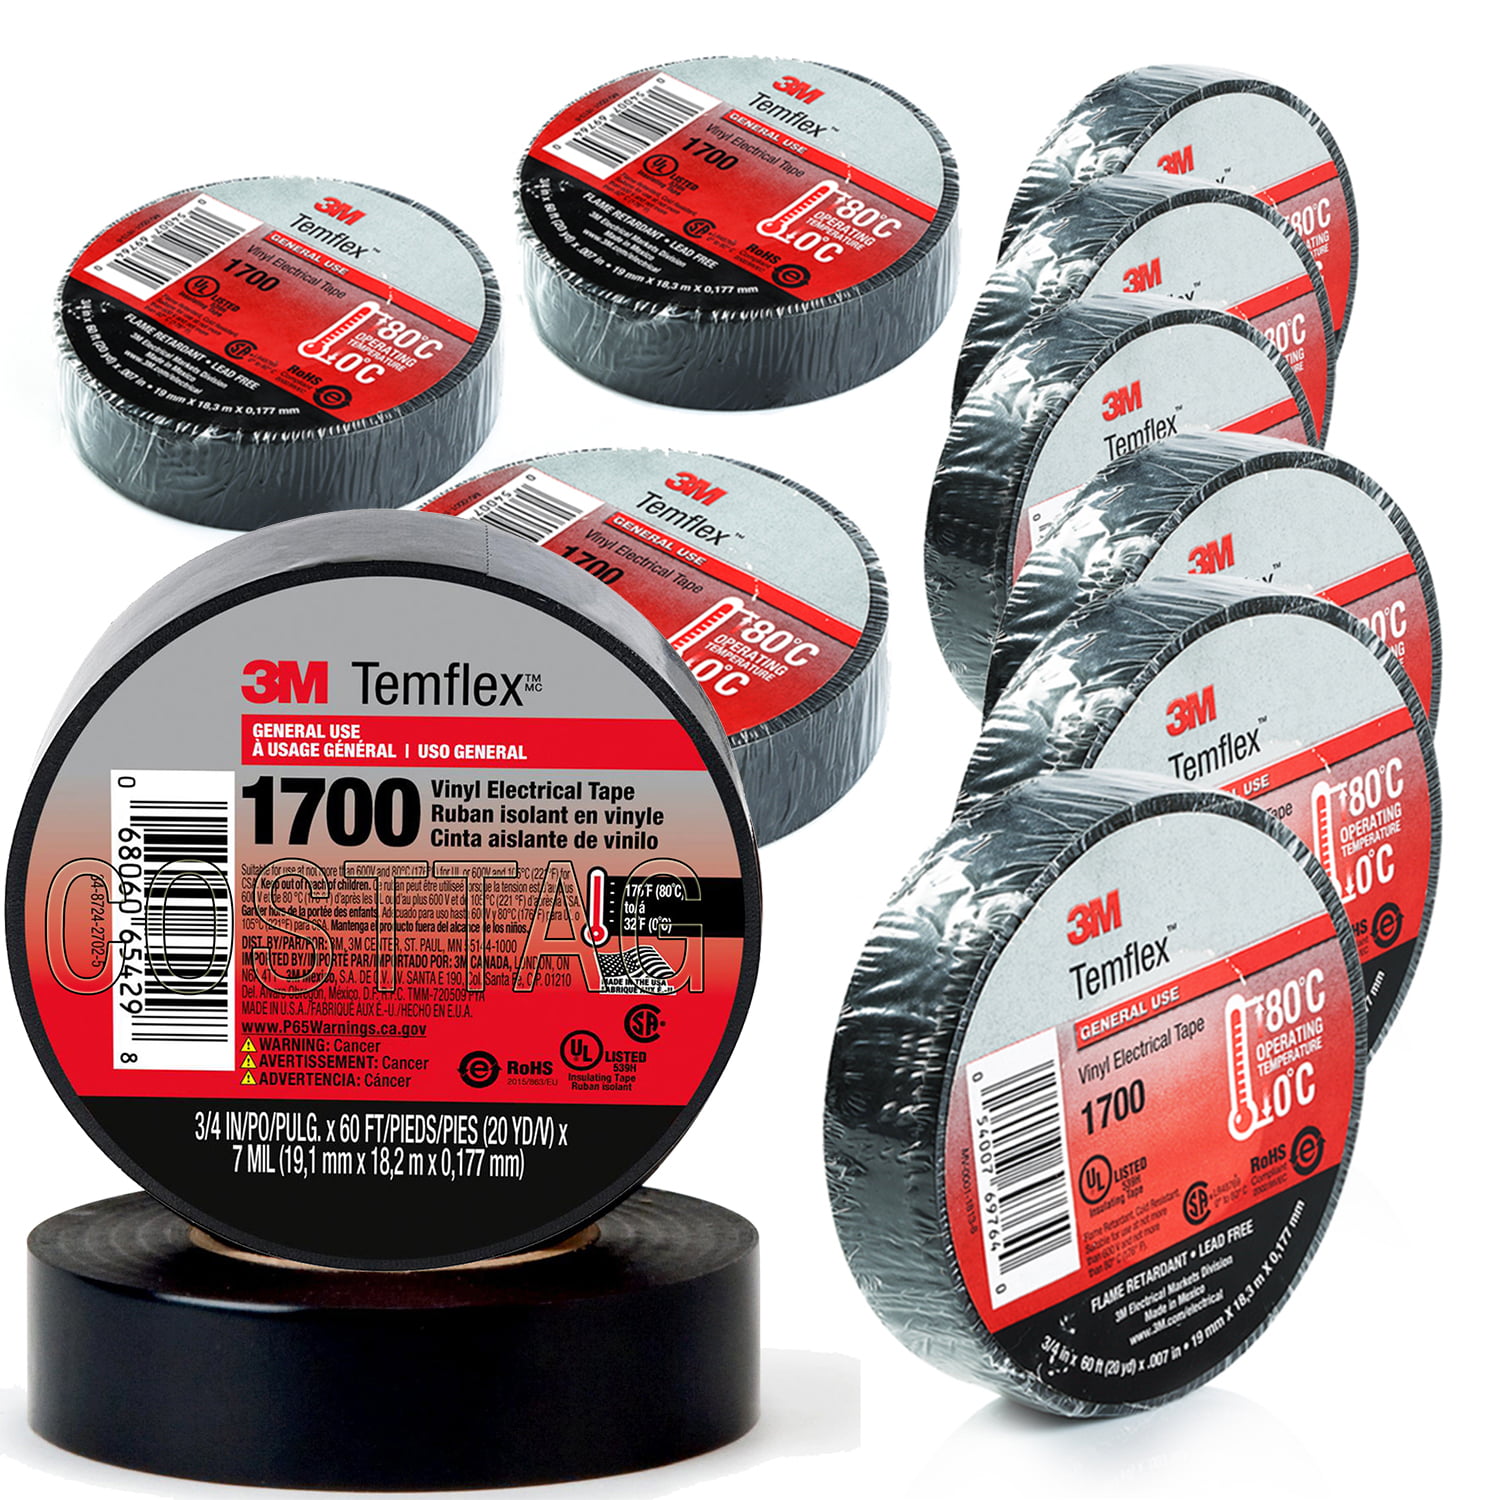 4 ROLLS 3M TEMFLEX 1700 ELECTRICAL TAPE BLACK 3/4" x 60 FT INSULATED ELECTRIC 